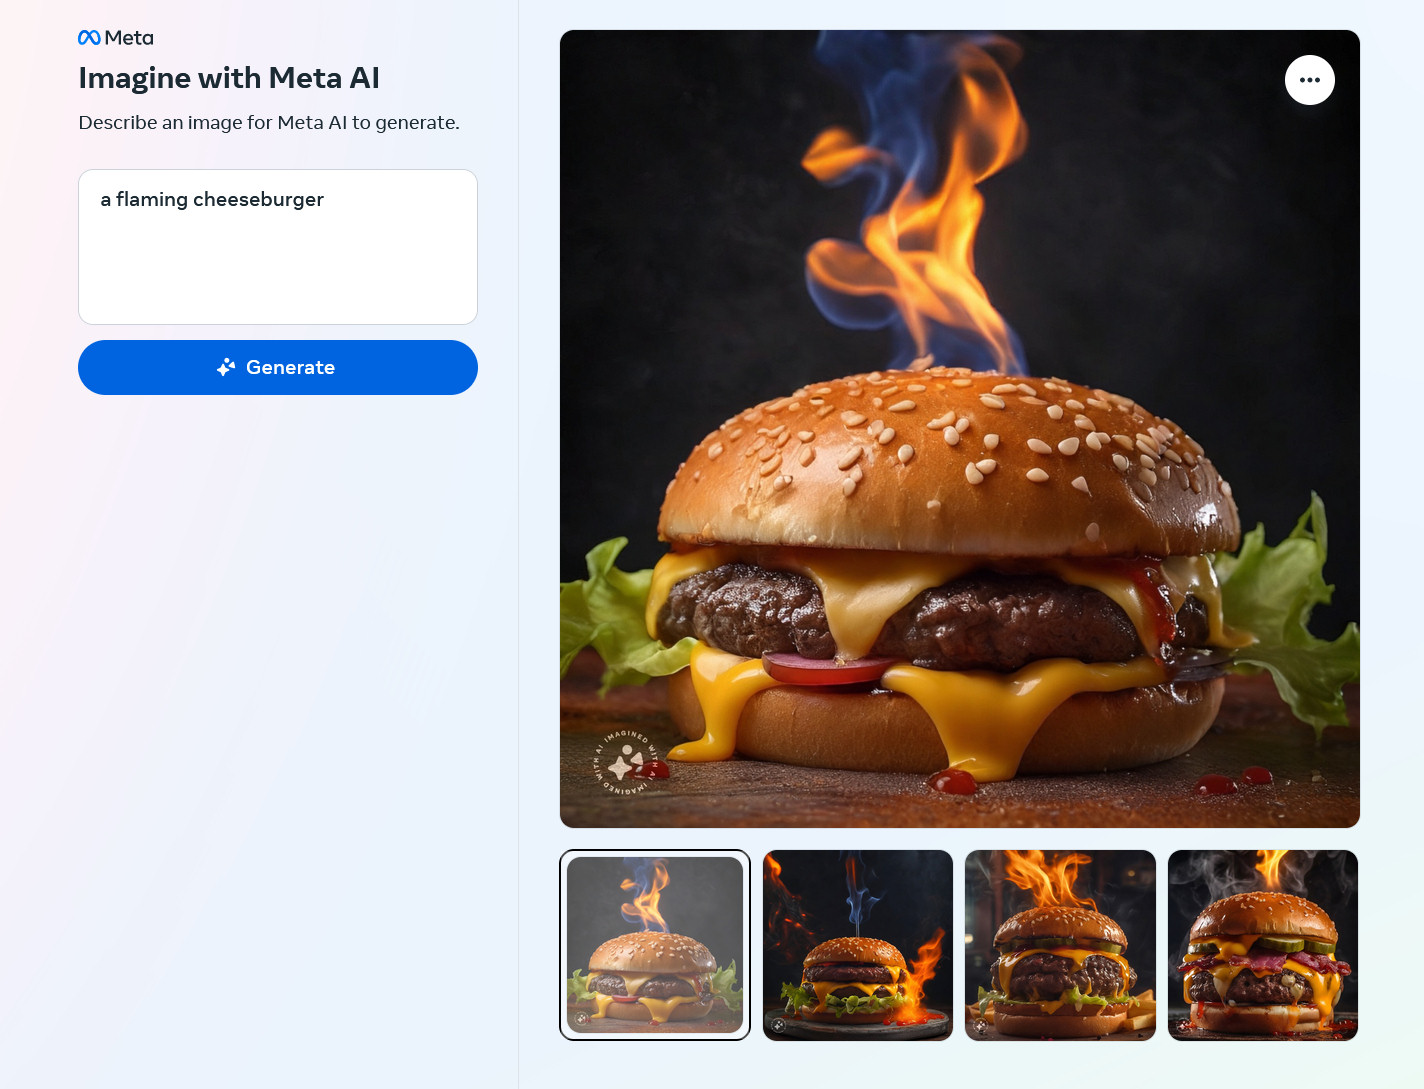 AI-generated images of a flaming cheeseburger created by Meta Emu on the Imagine with Meta AI website.